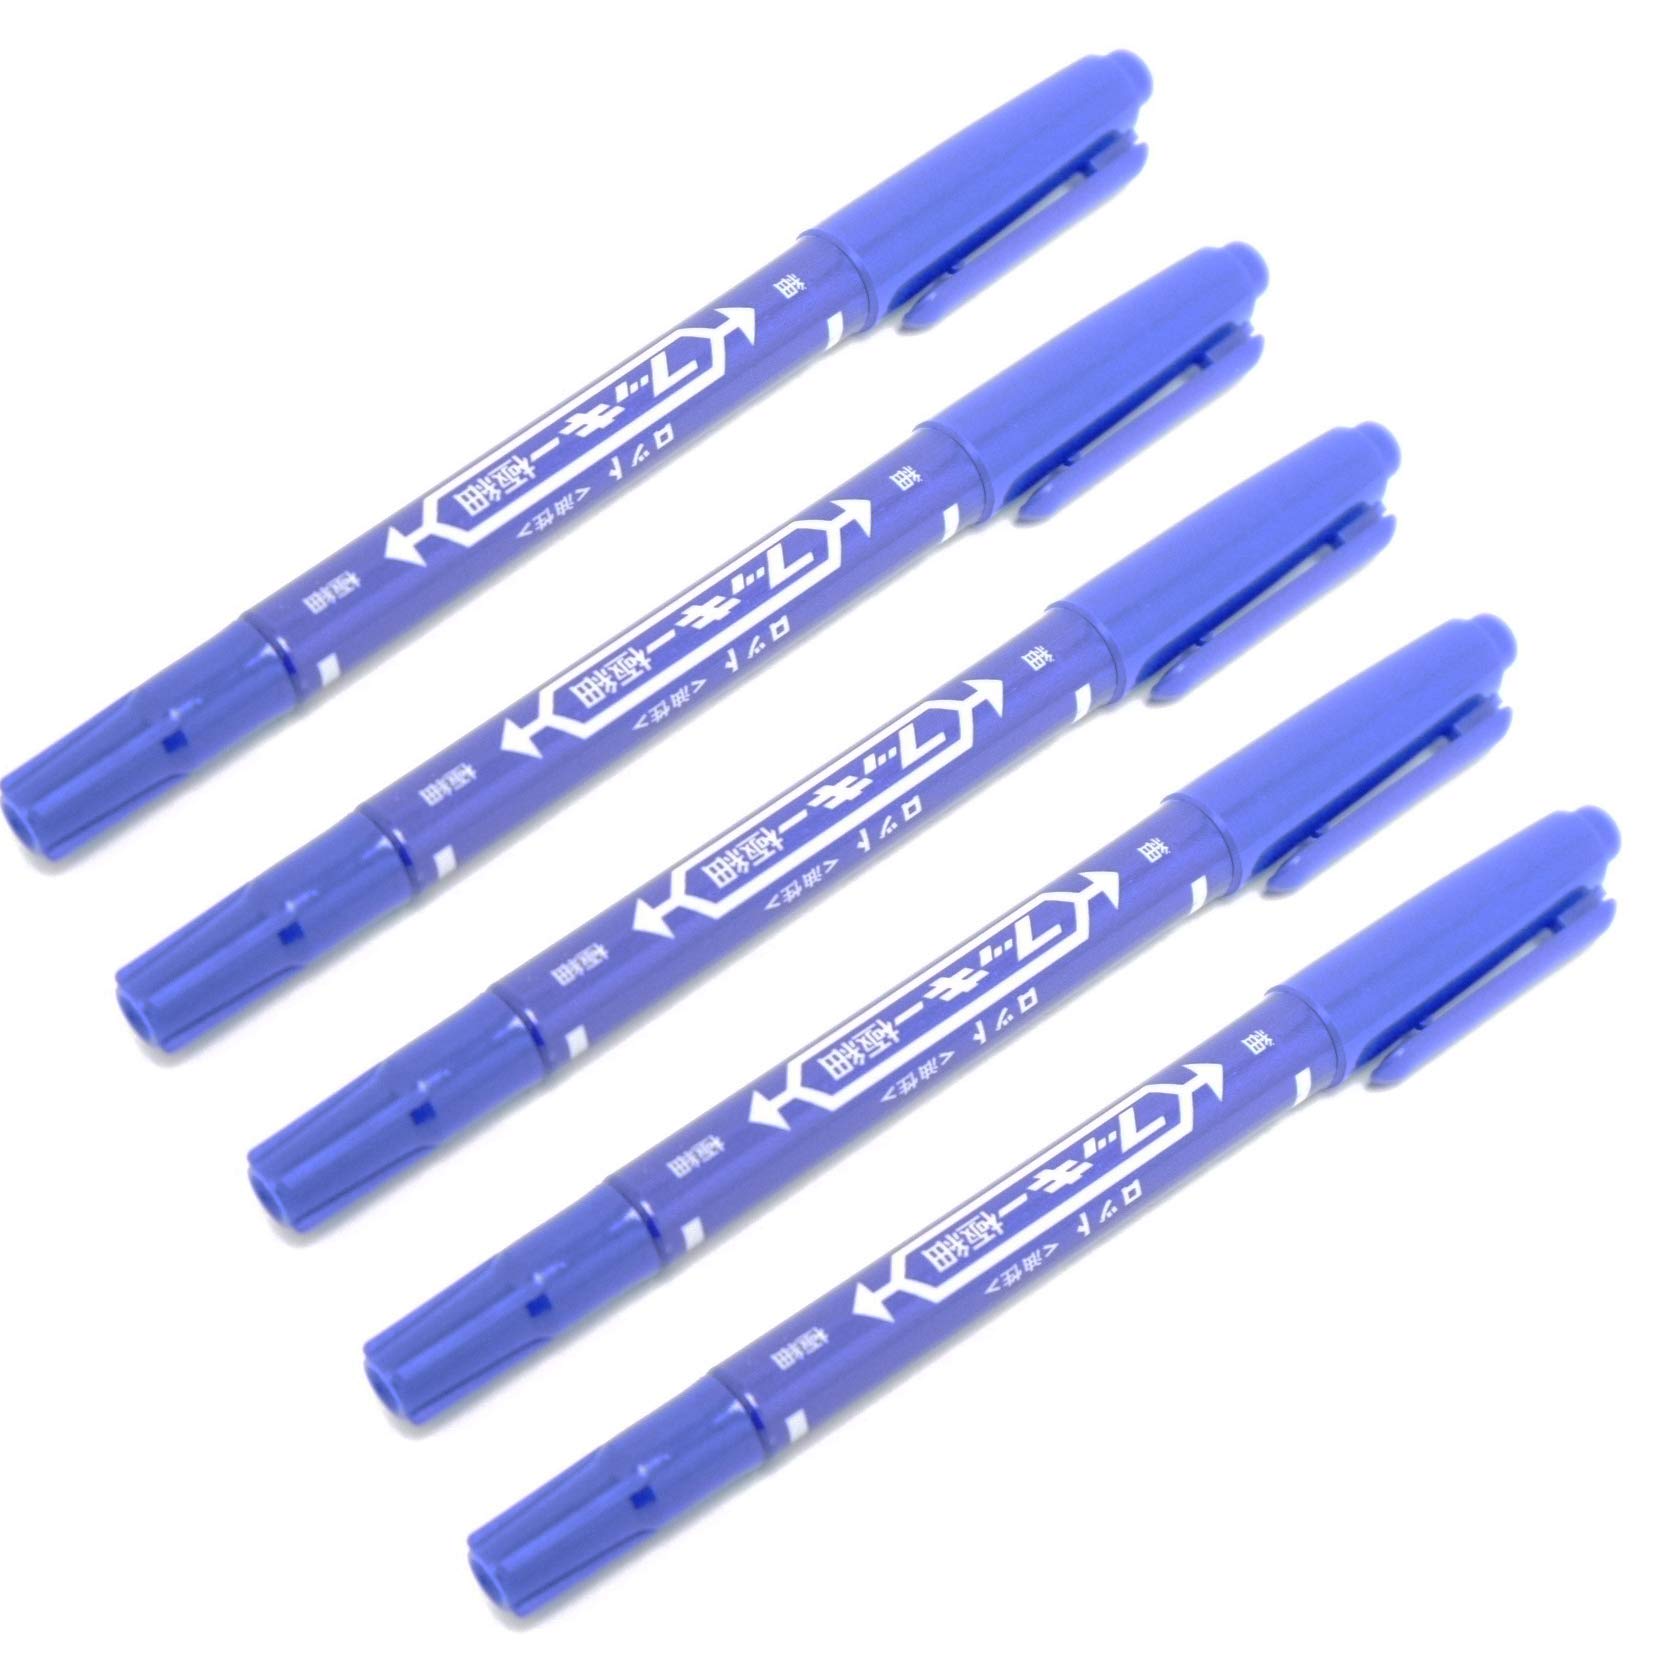 Tattoo Skin Scribe Pen Dual-Tip Marker Piercing Marking Surgical Tattooing (5 Pack, Blue)